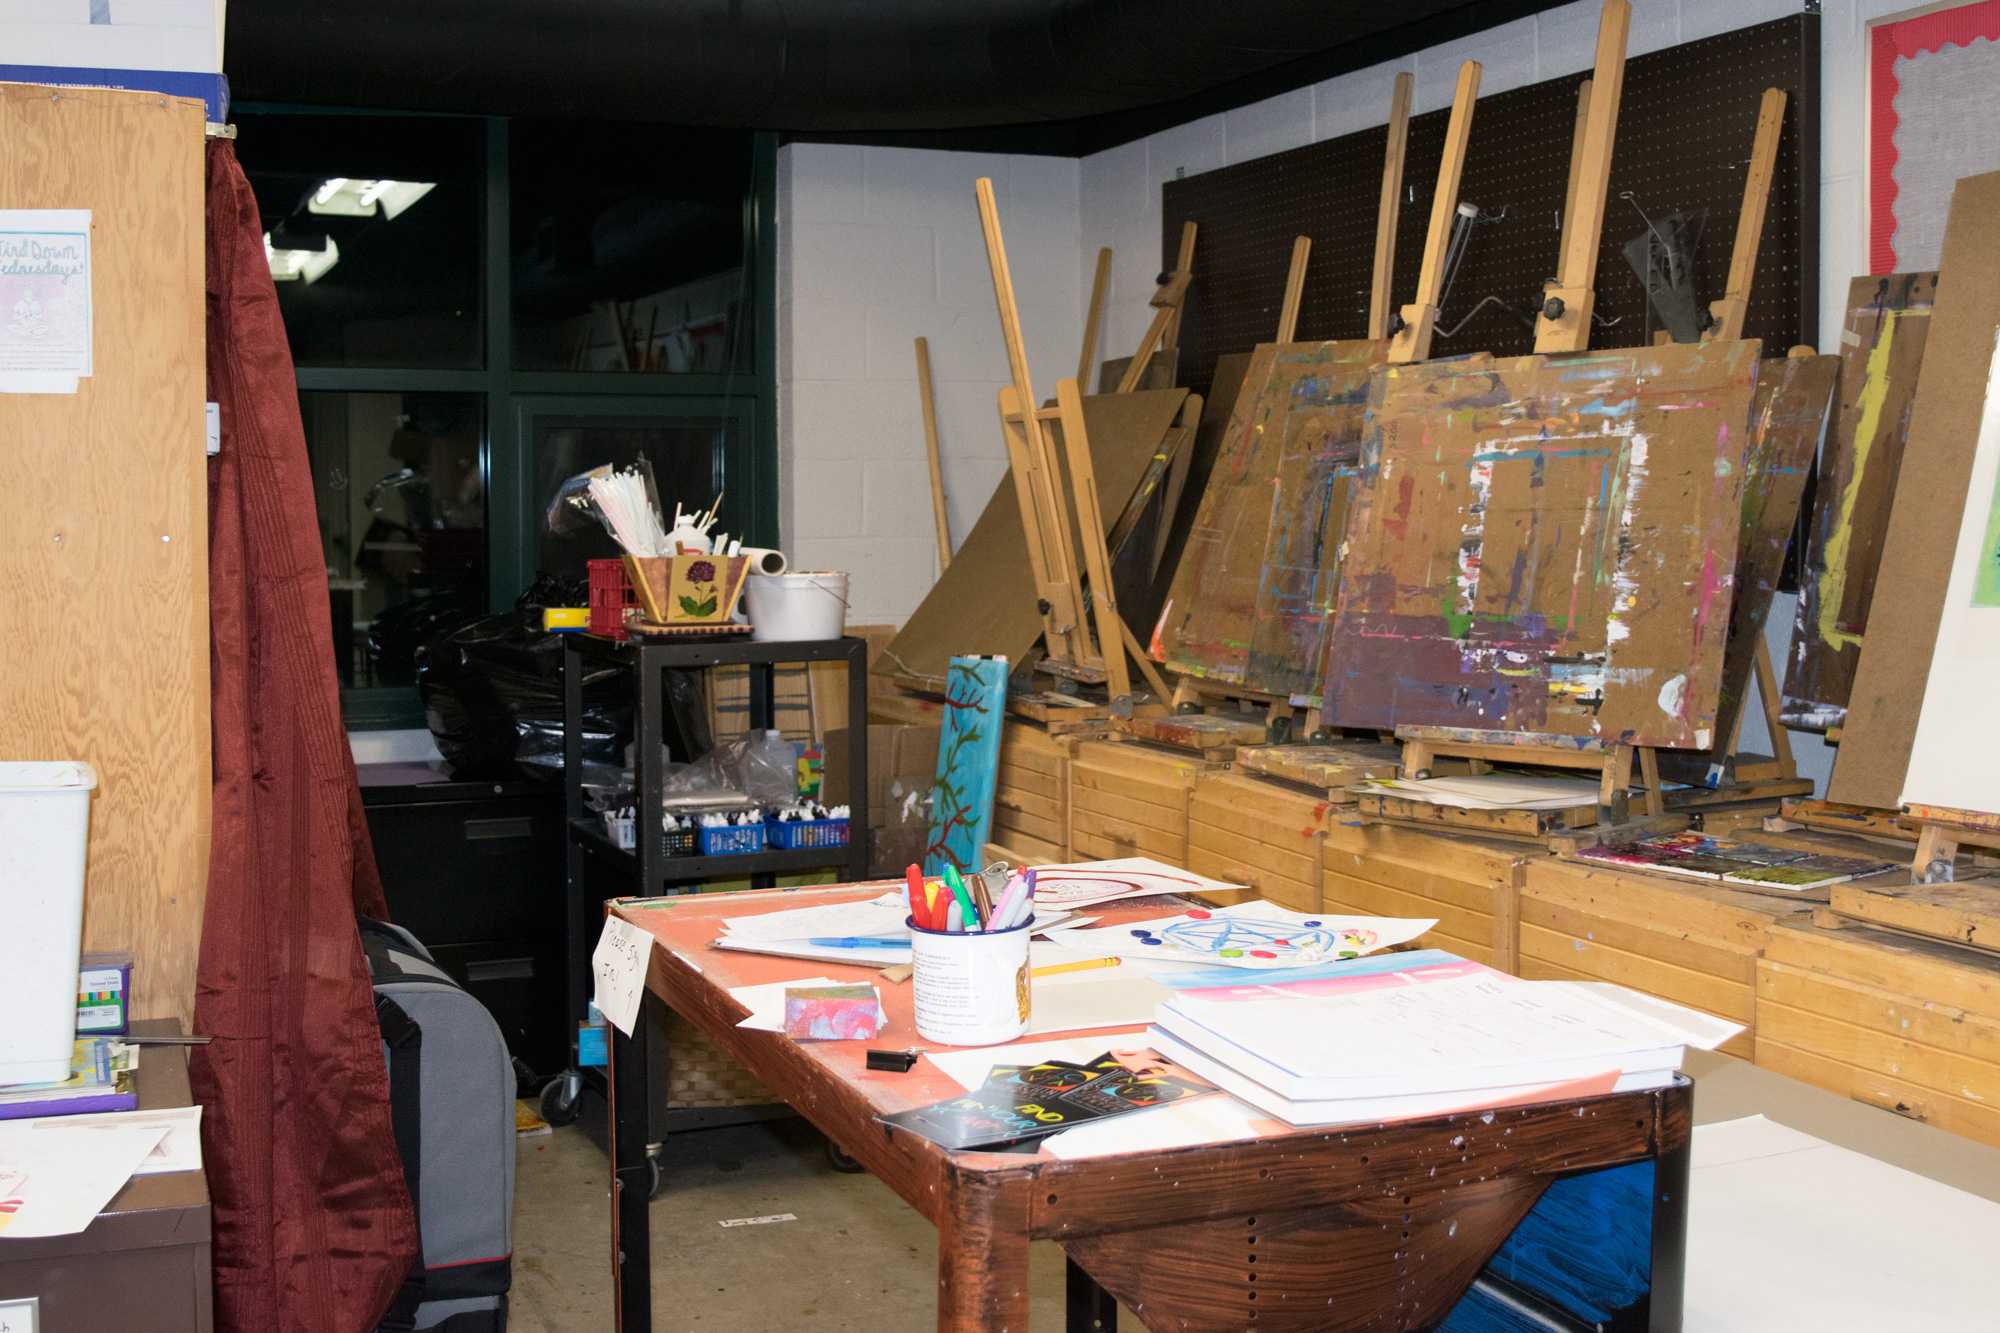 Canvases and easels await use at the Turchin's art studio.